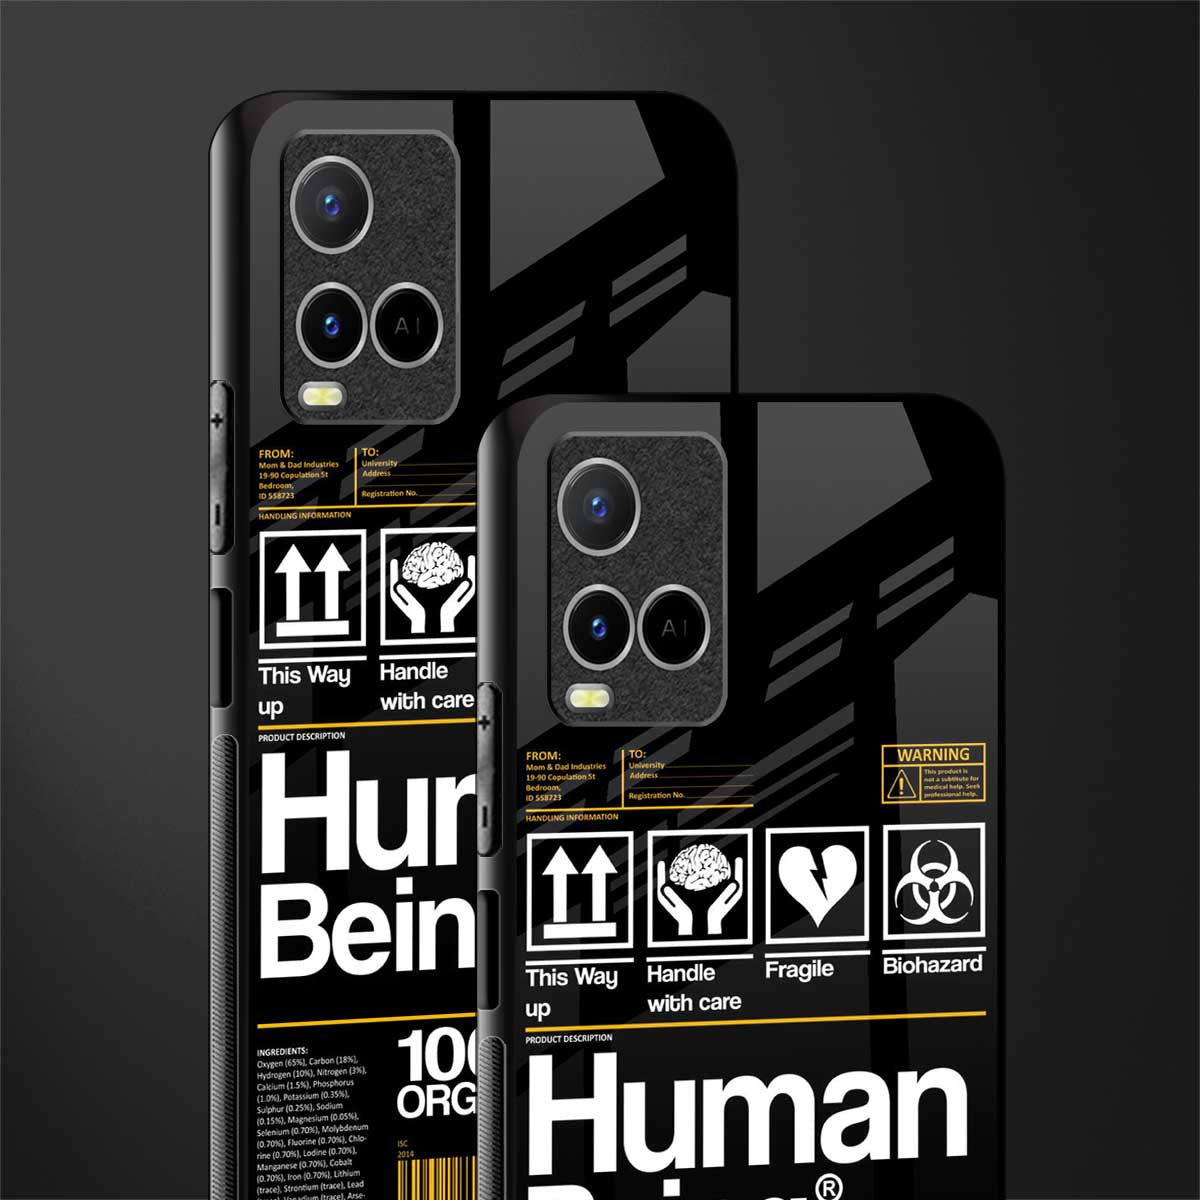 human being label phone cover for vivo y21s